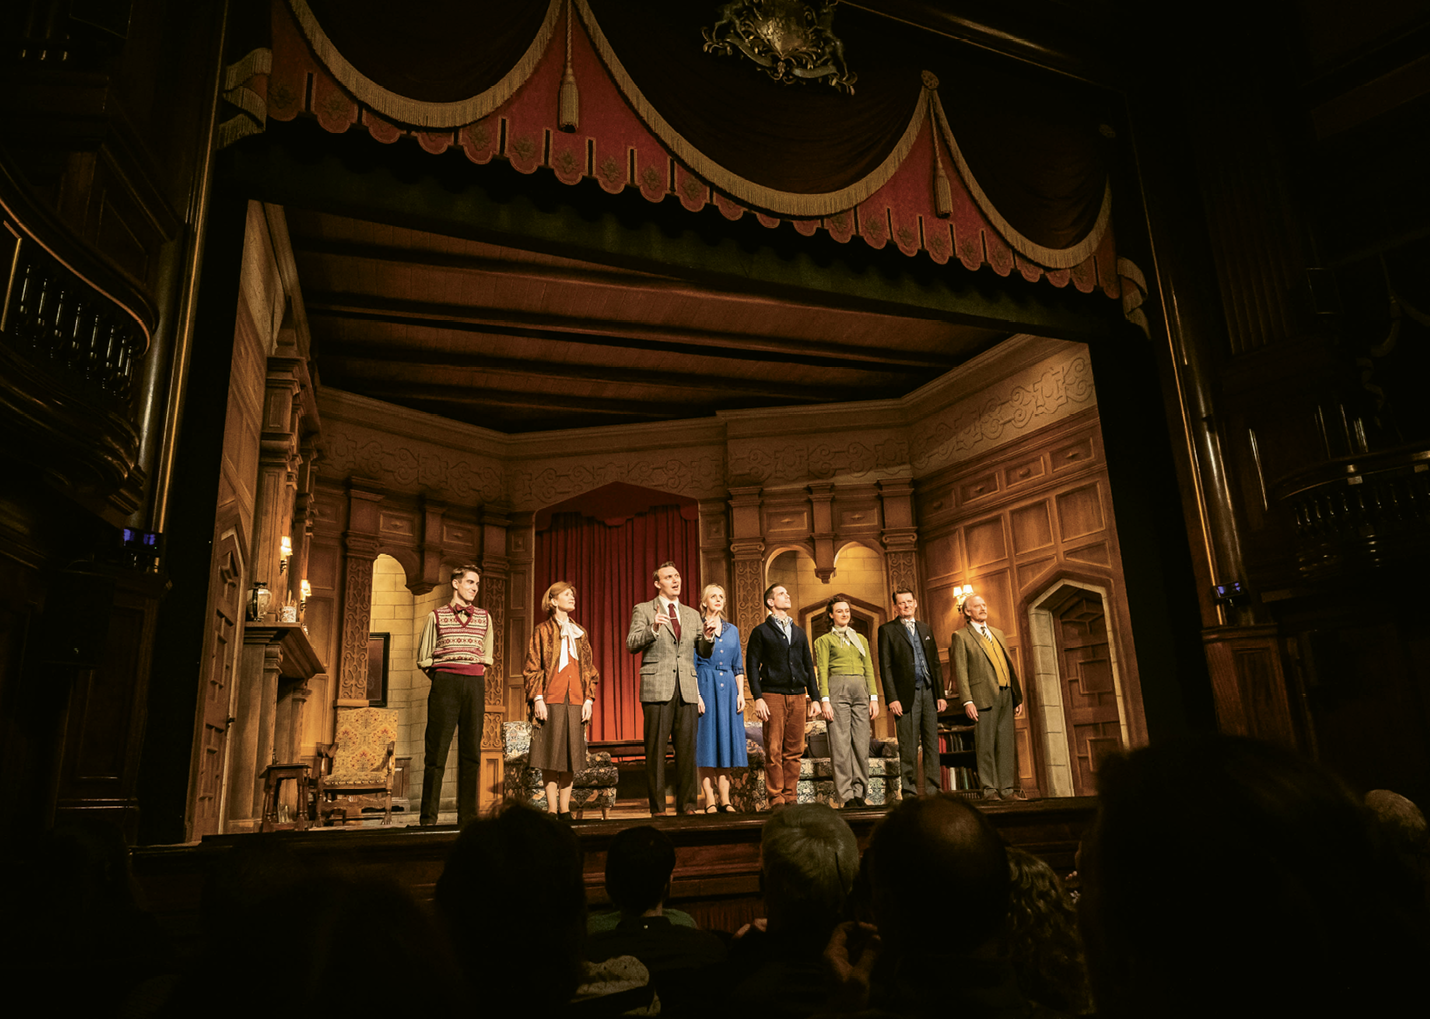 The 27,788th performance of The Mousetrap at St. Martin’s Theatre